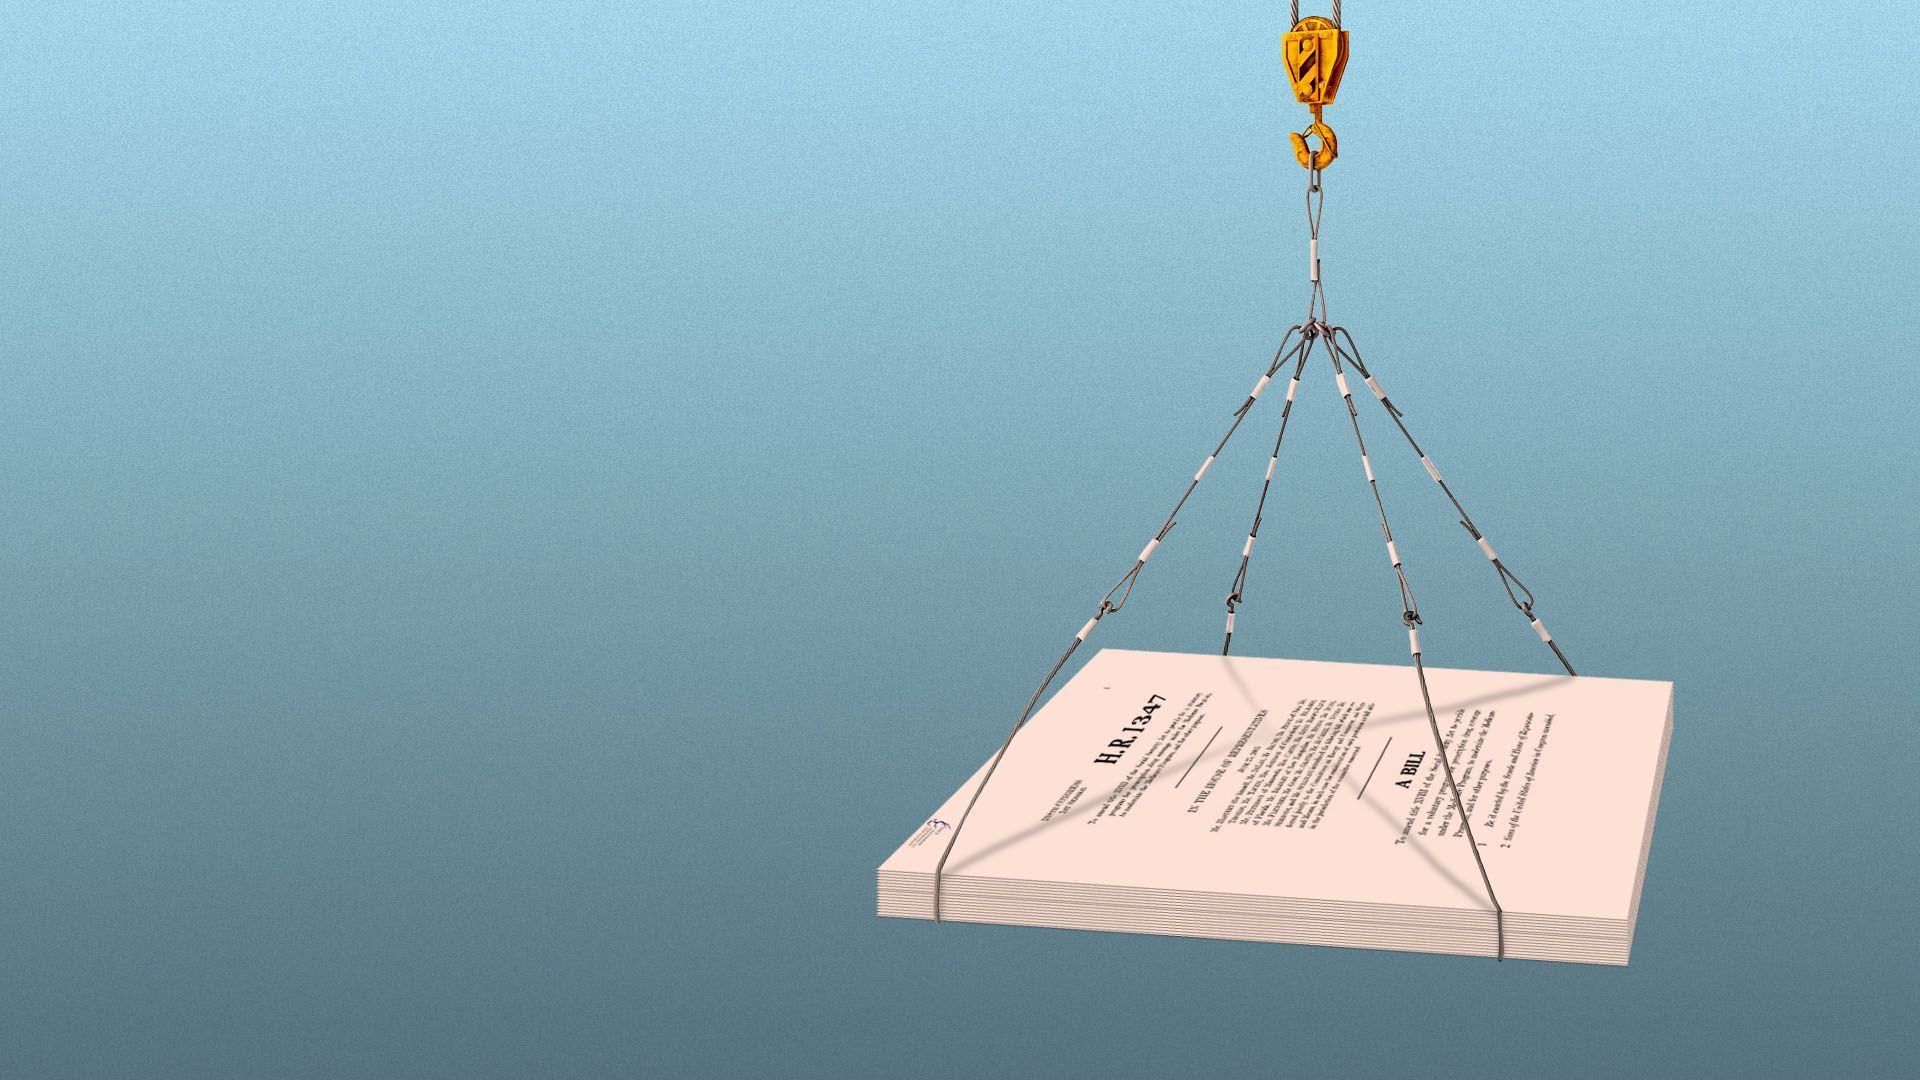 Illustration of a Congressional bill being lifted by a crane